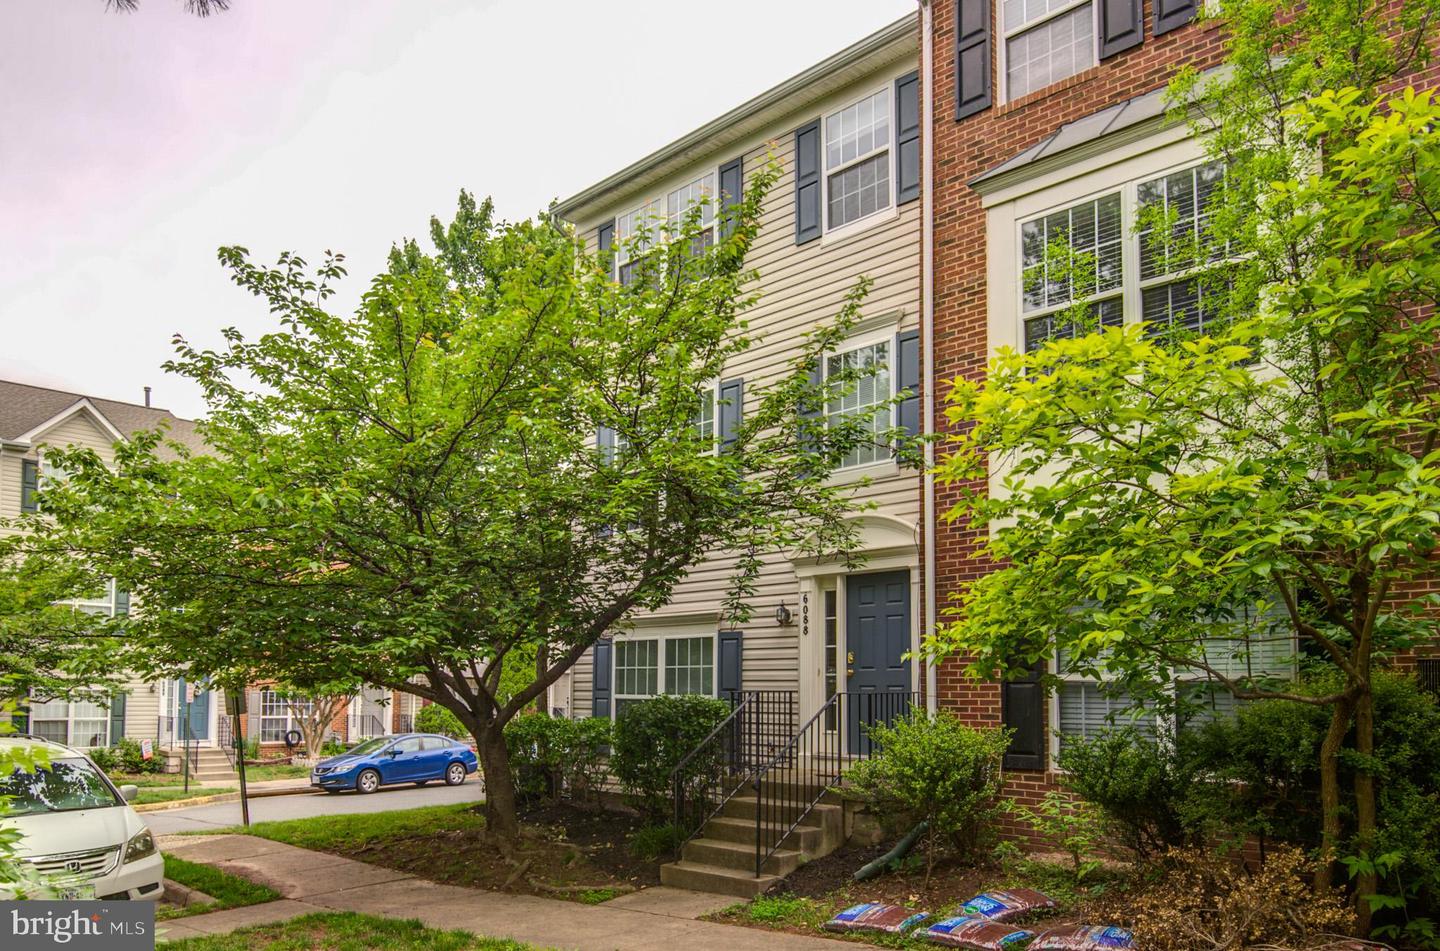 View Centreville, VA 20121 townhome